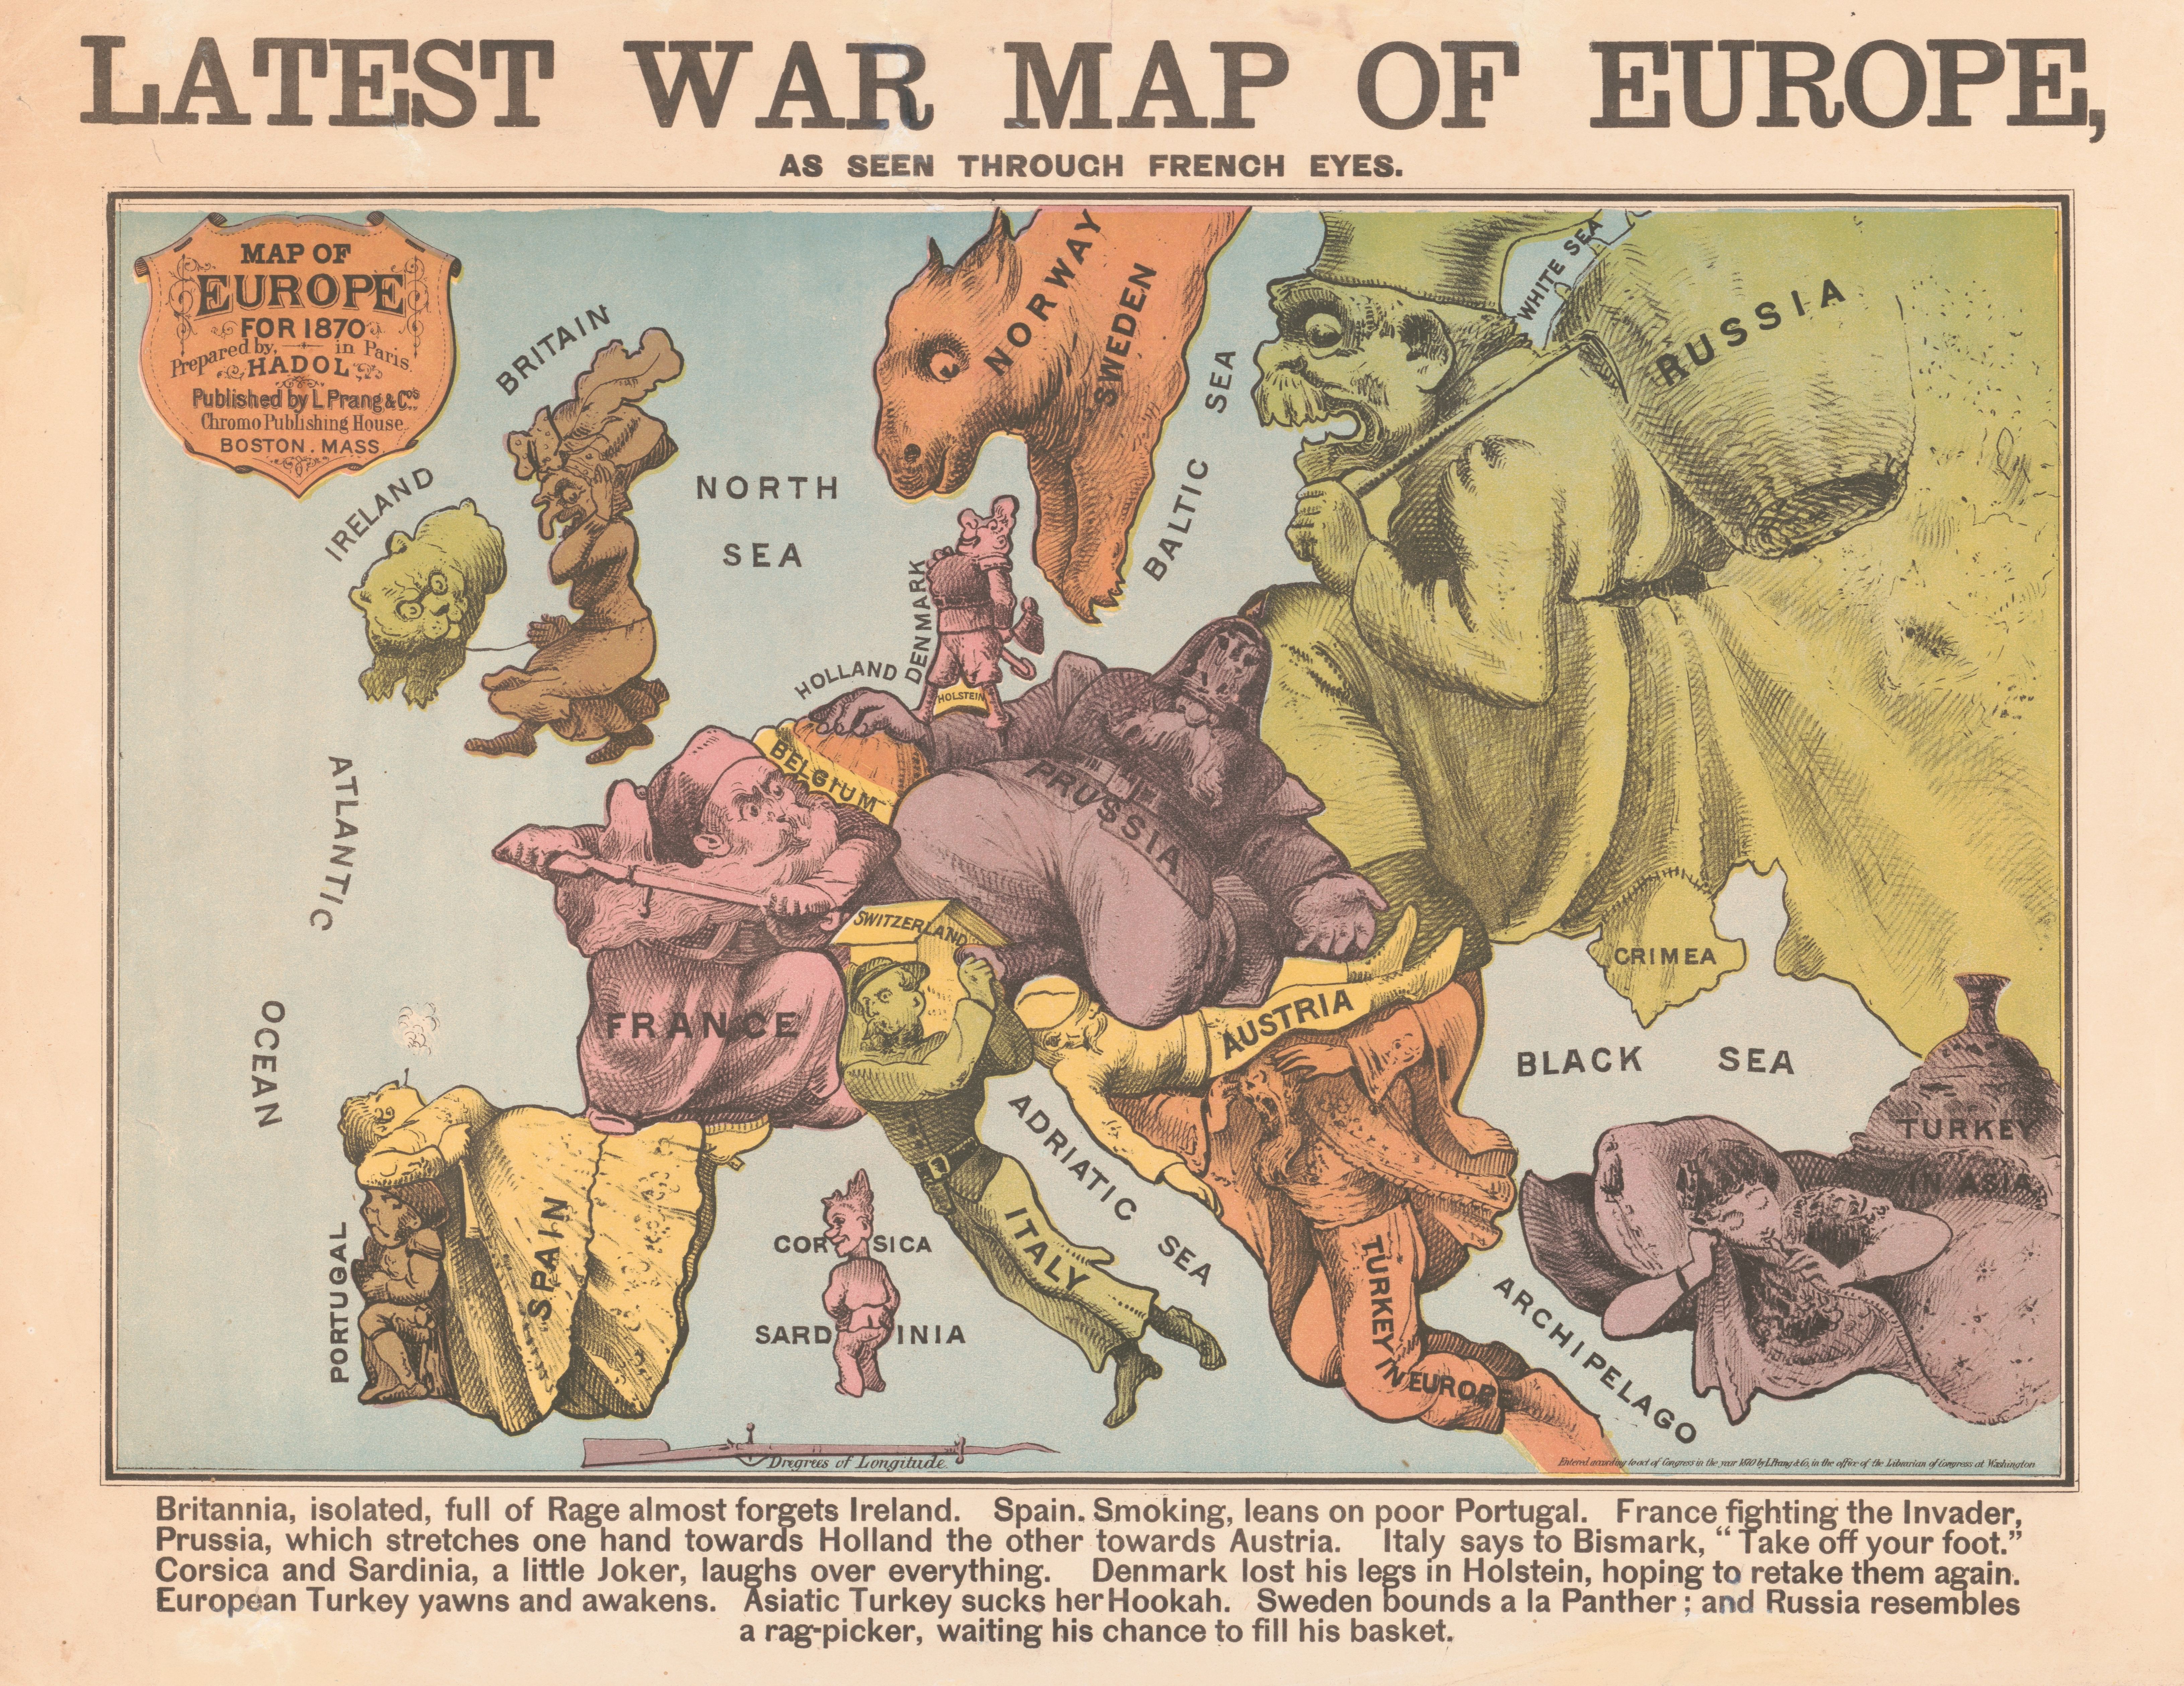 Latest War Map of Europe as seen through French Eyes. 1870